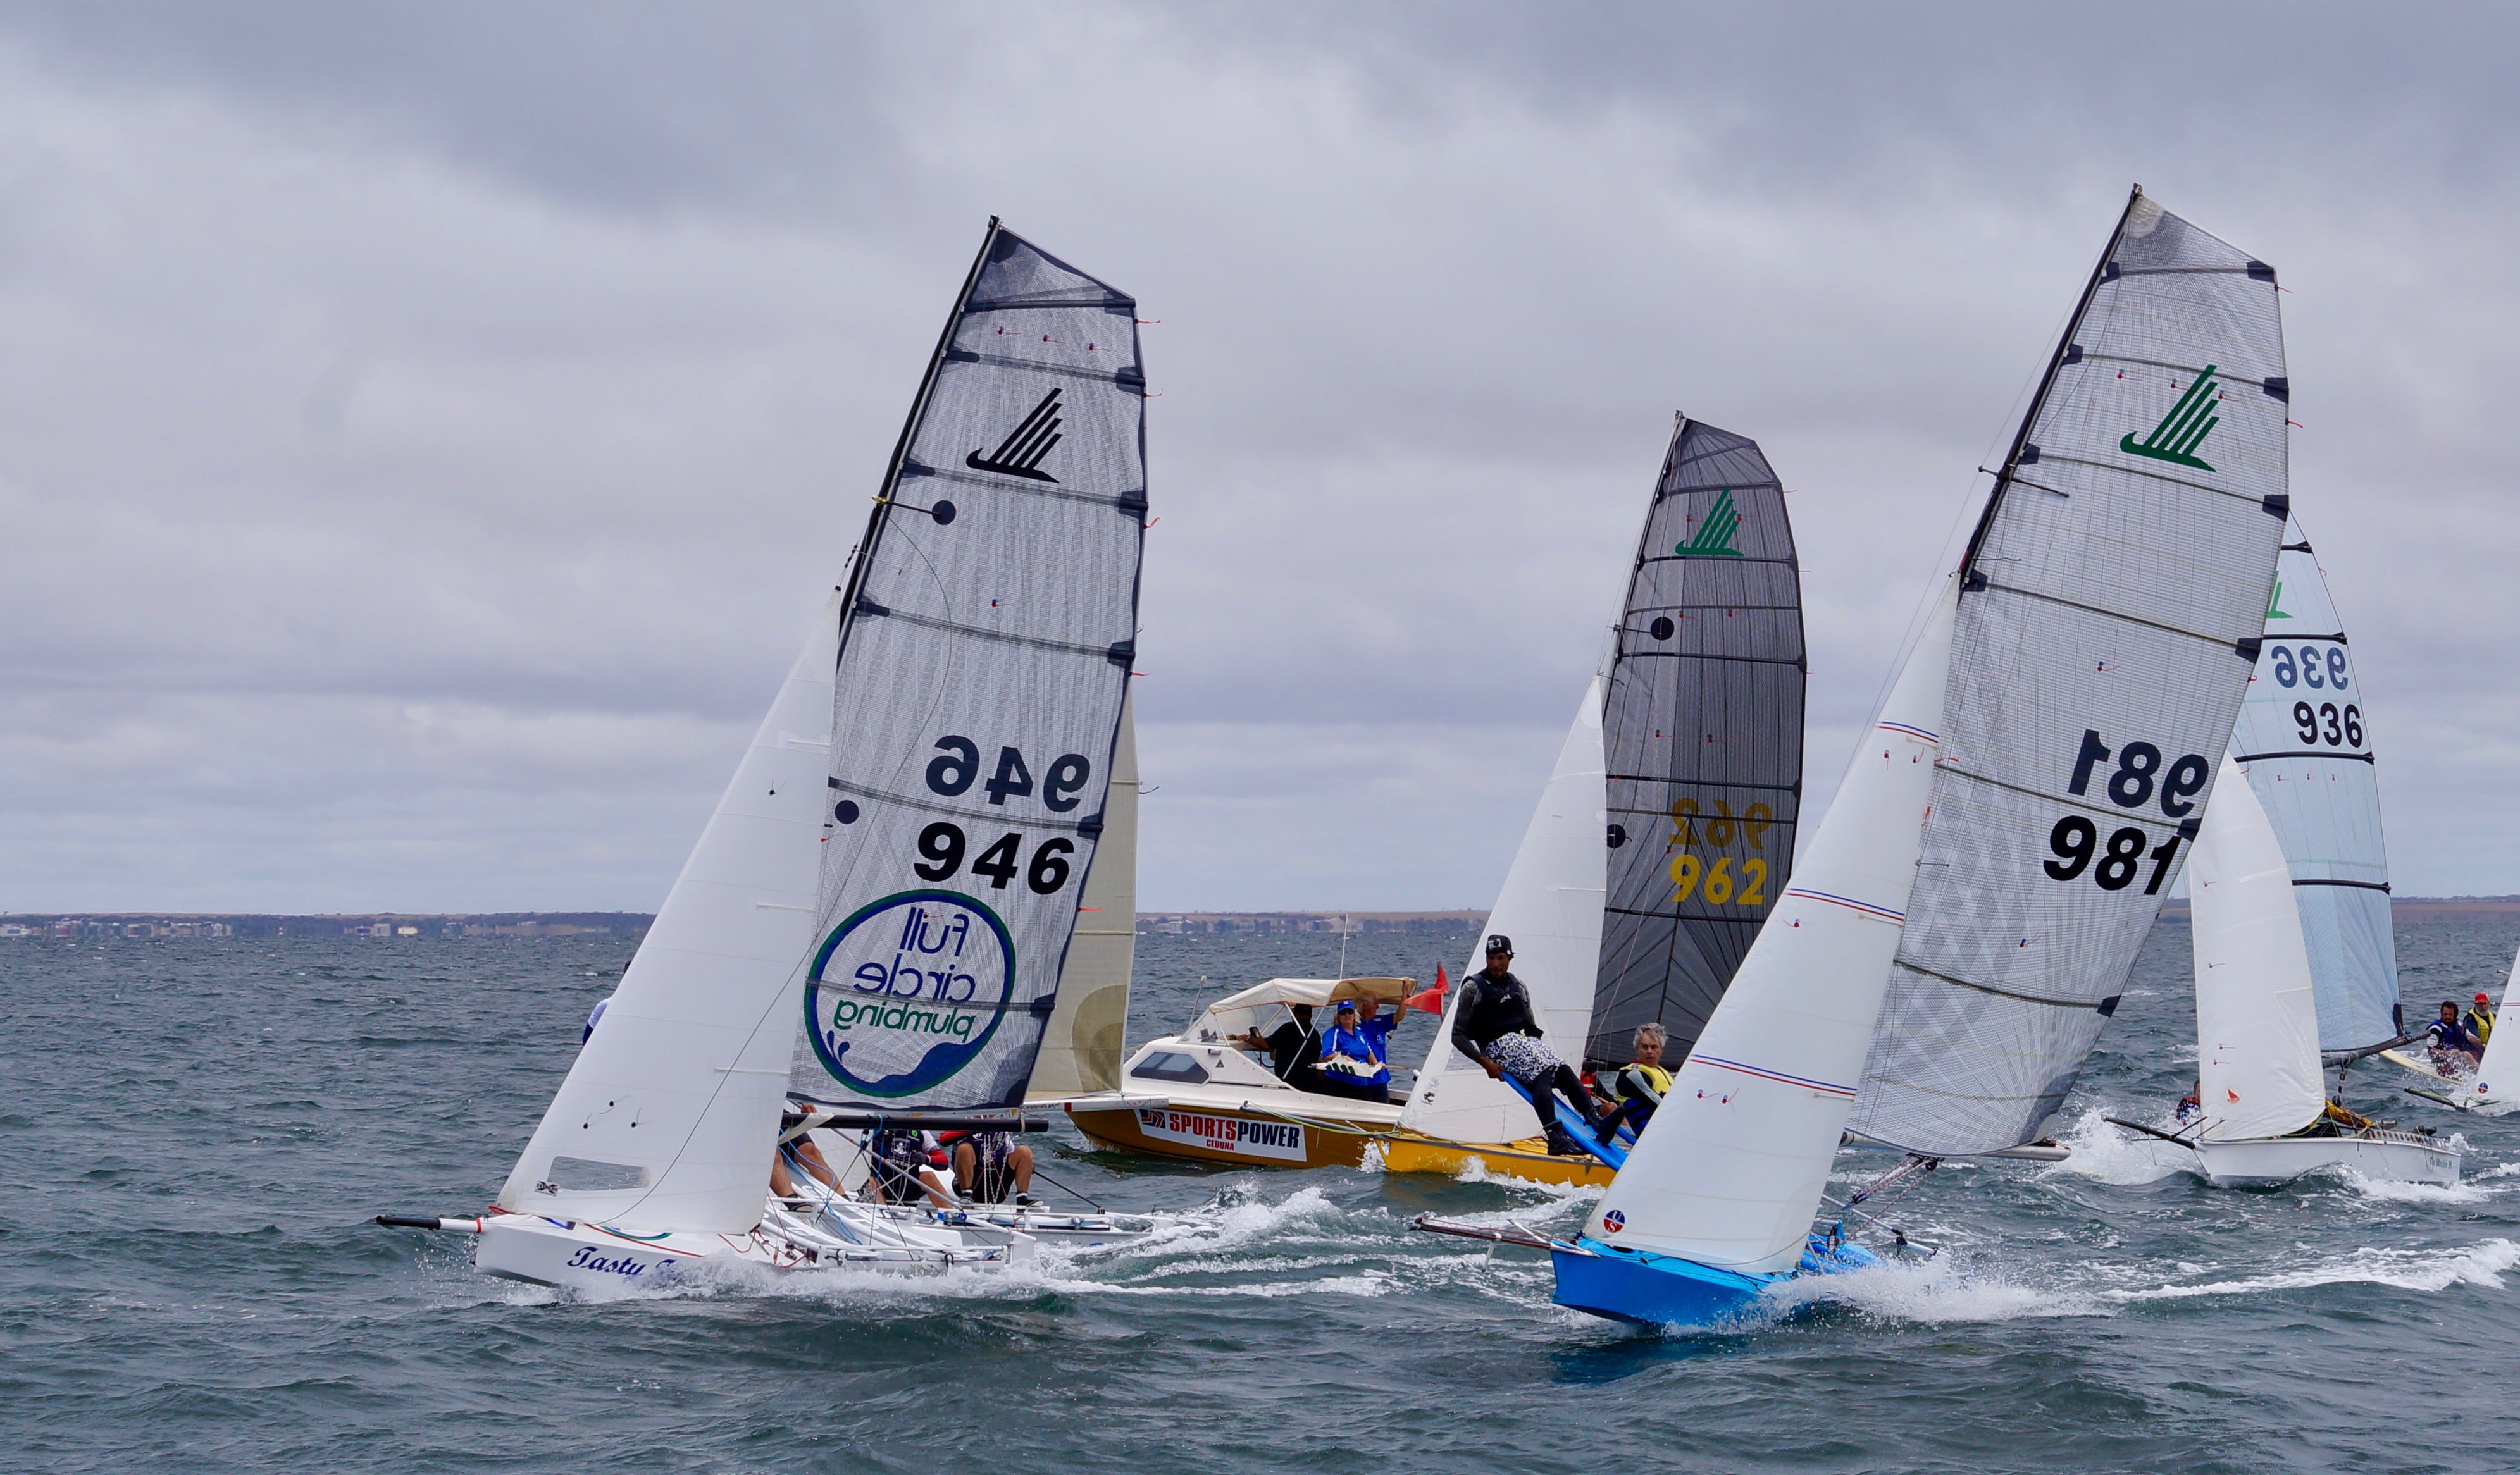 Plenty of breeze for opening races of Skate titles in Ceduna